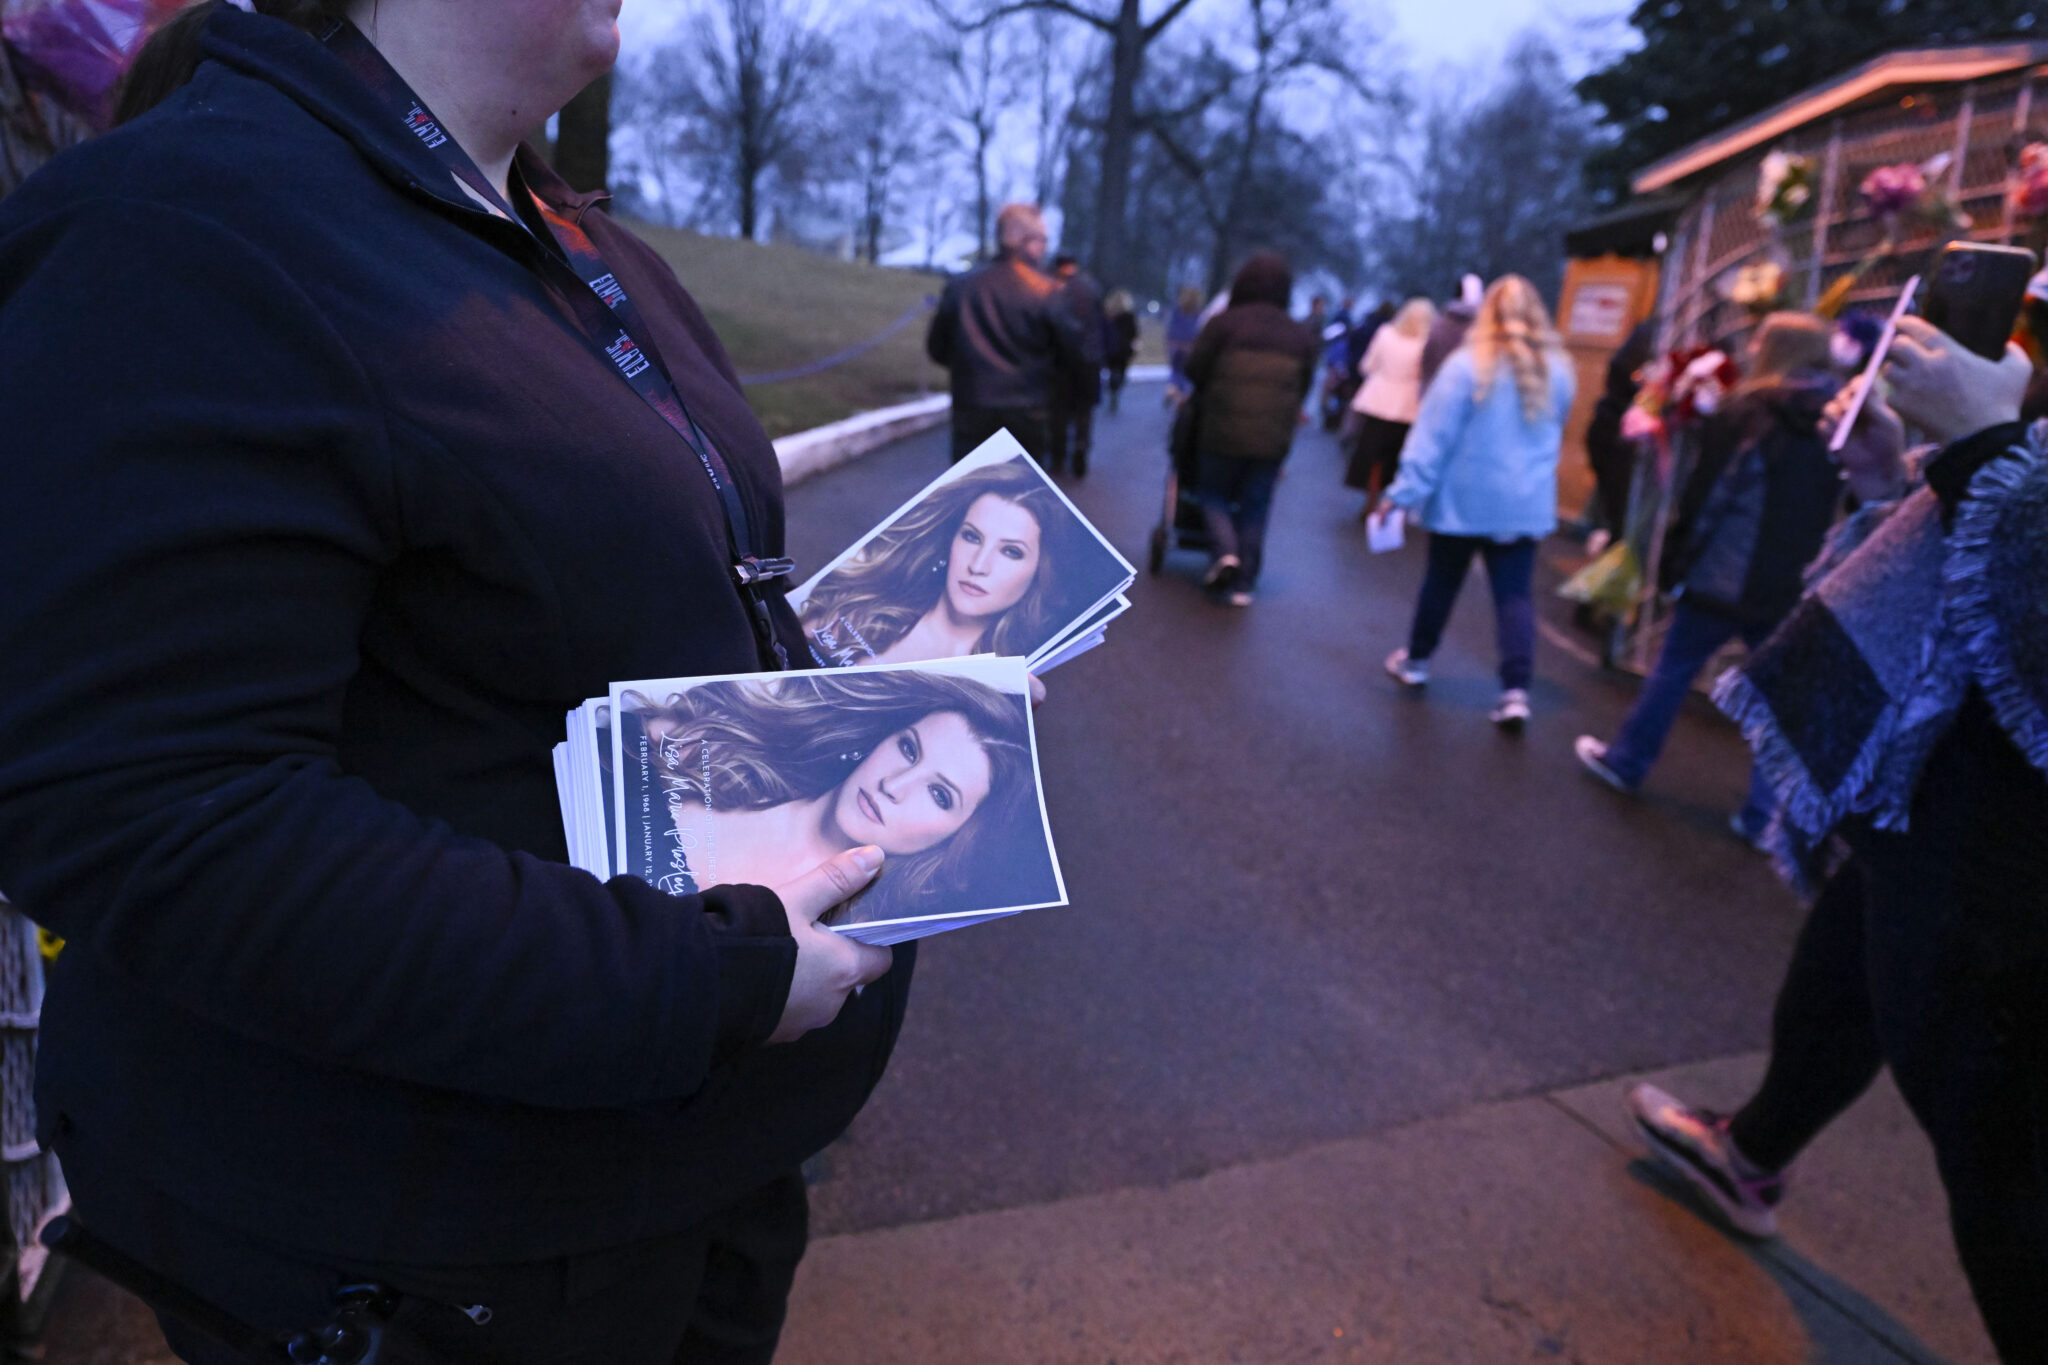 An attendant holds programs as fans enter Graceland for a memorial service for Lisa Marie Presley Sunday, Jan. 22, 2023, in Memphis, Tenn. She died Jan. 12 after being hospitalized for a medical emergency and was buried on the property next to her son Benjamin Keough, and near her father Elvis Presley and his two parents. (AP Photo/John Amis)